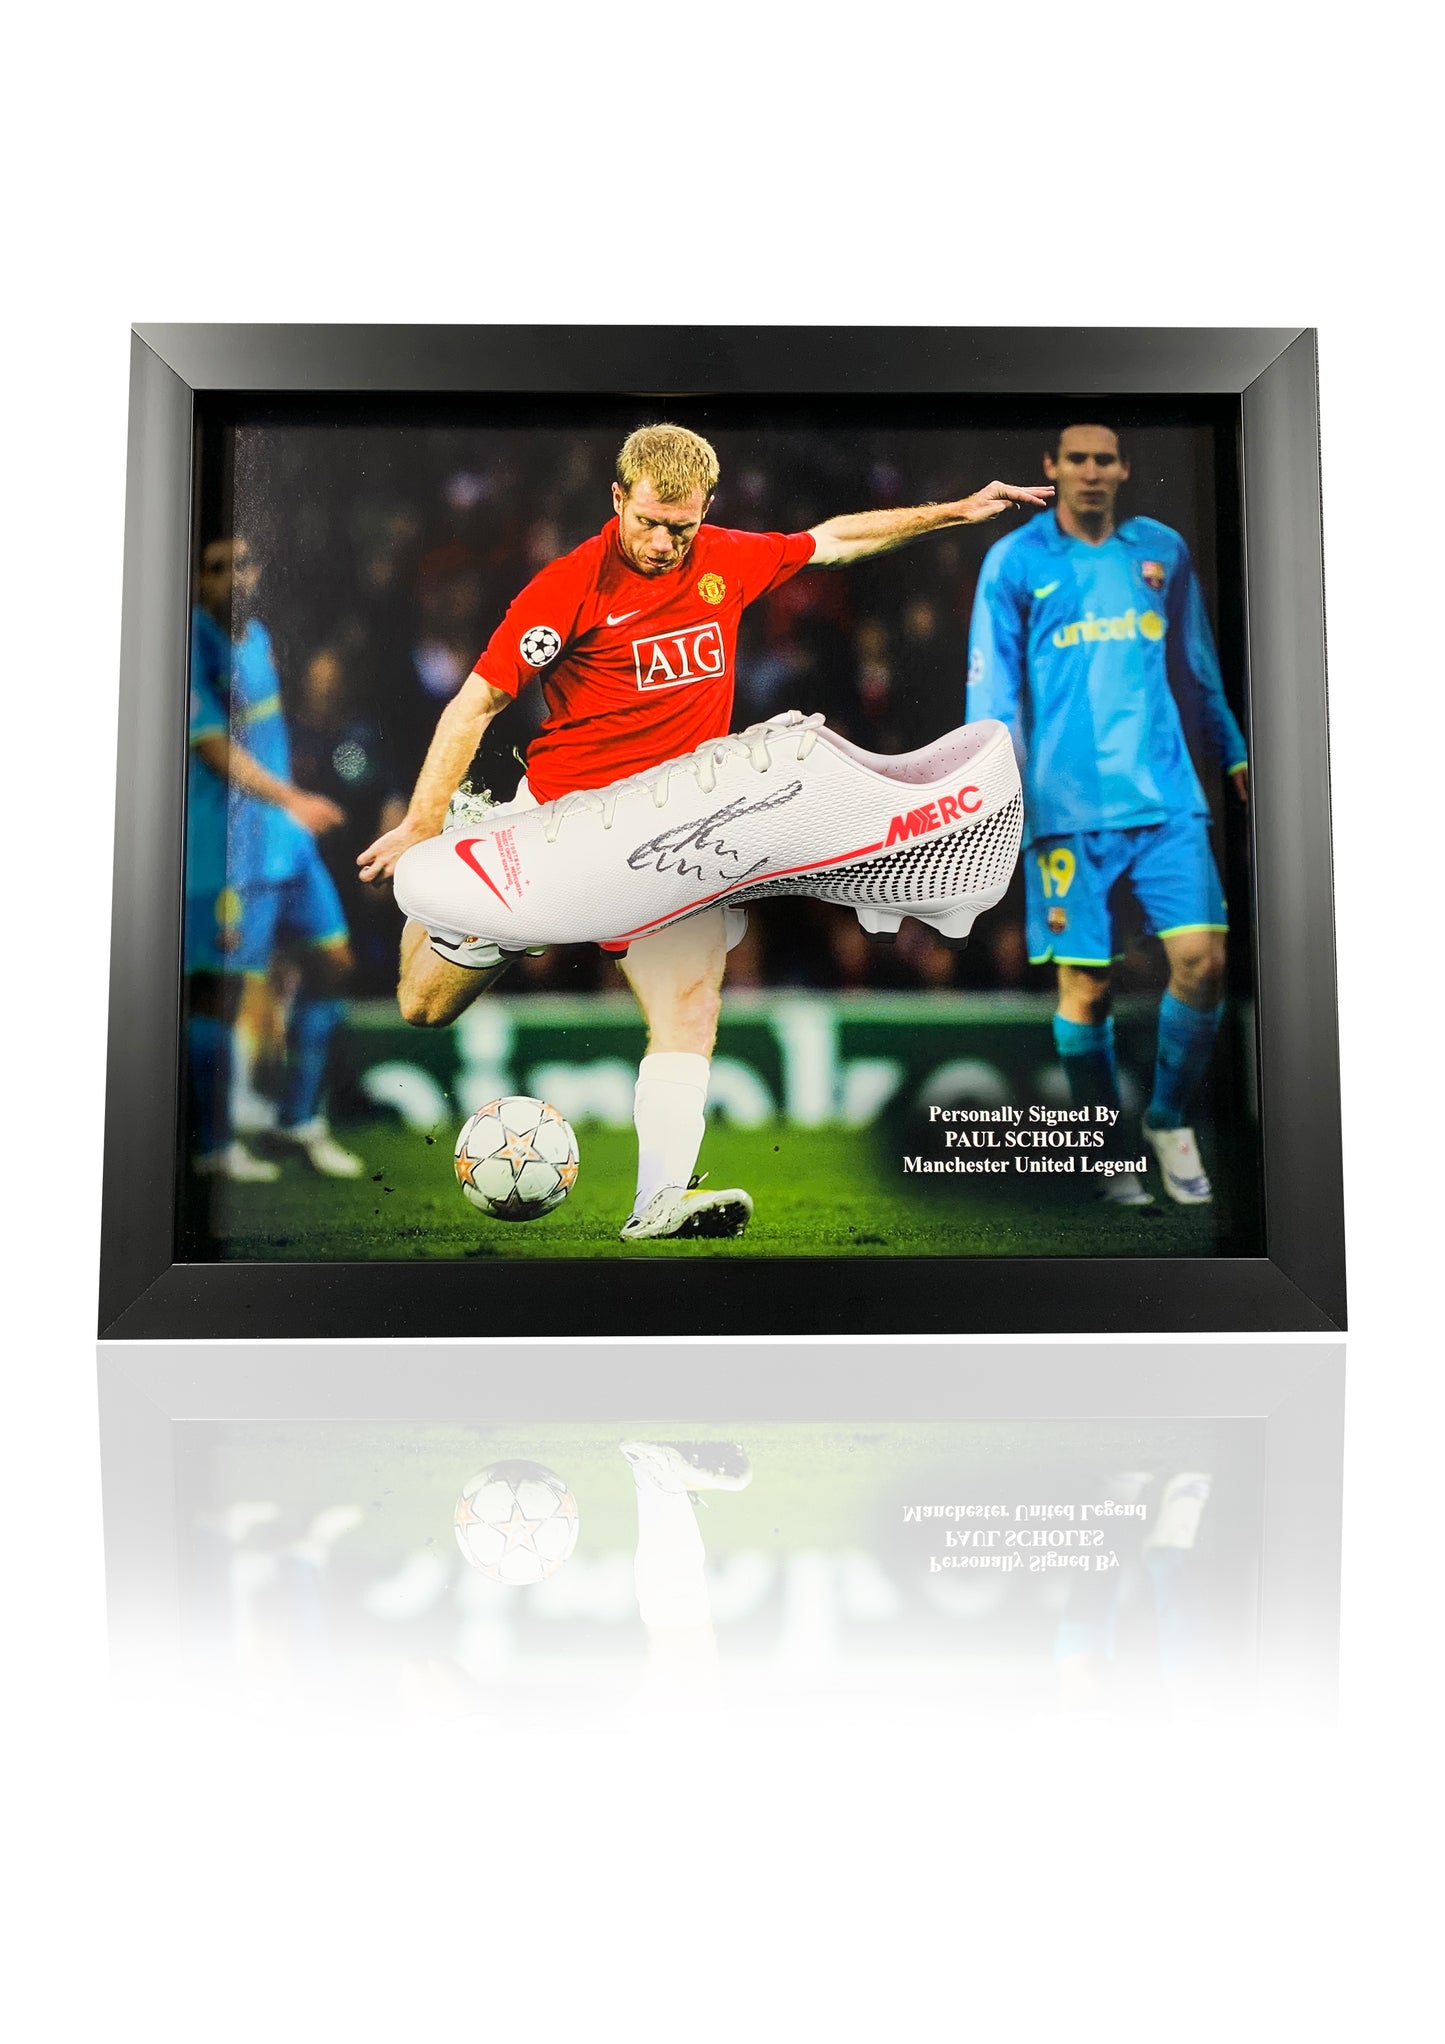 Paul Scholes Signed football boot dome frame